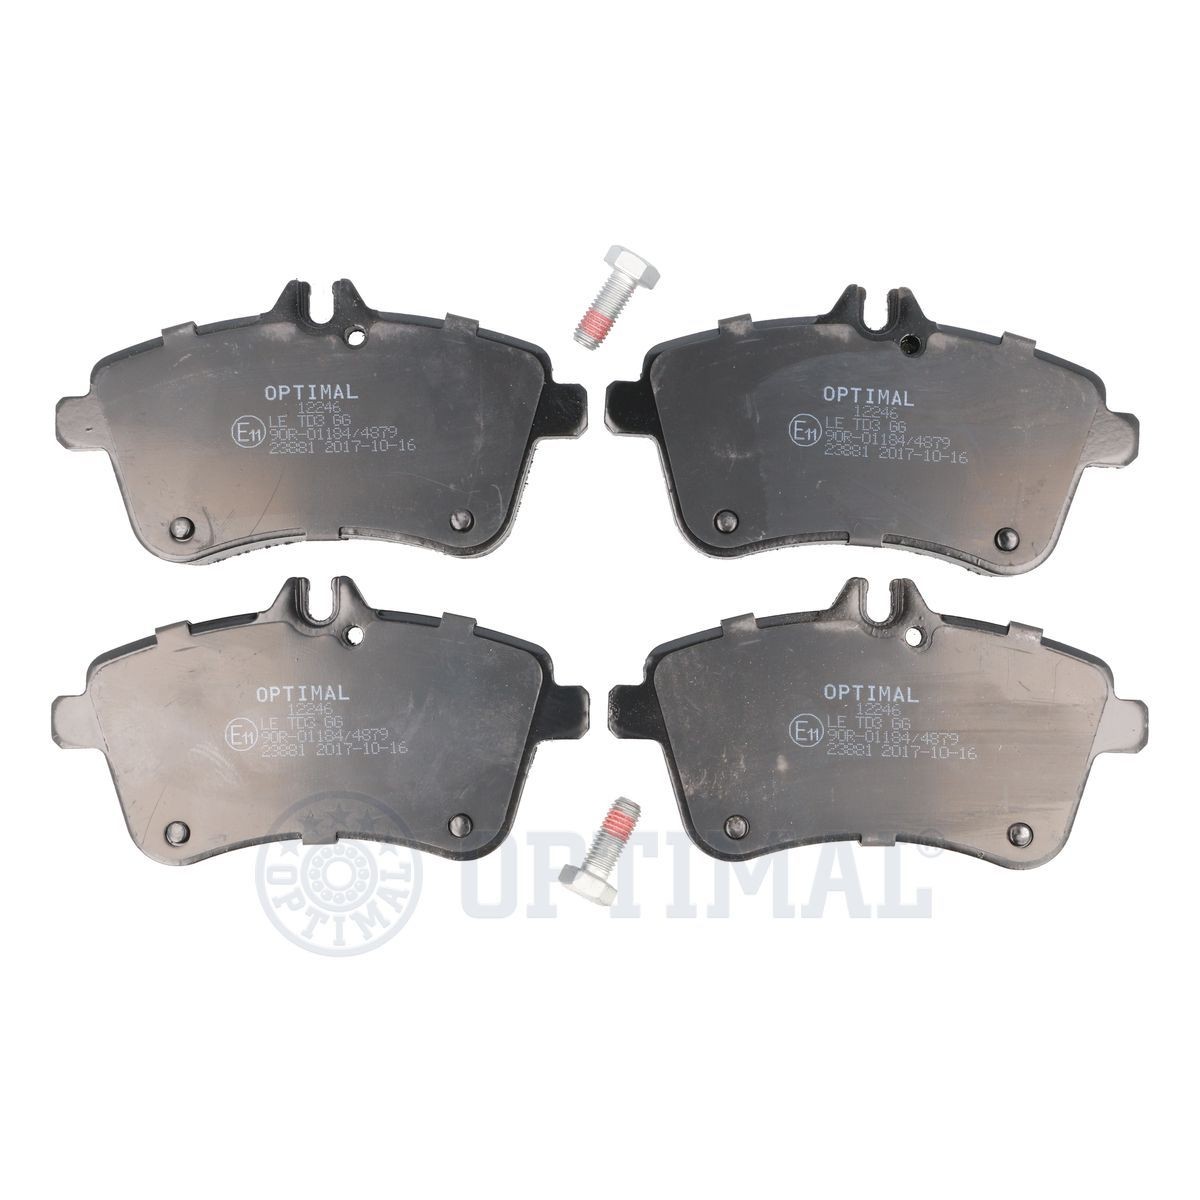 OPTIMAL BP-12246 Brake pad set Front Axle, prepared for wear indicator, excl. wear warning contact, with bolts/screws